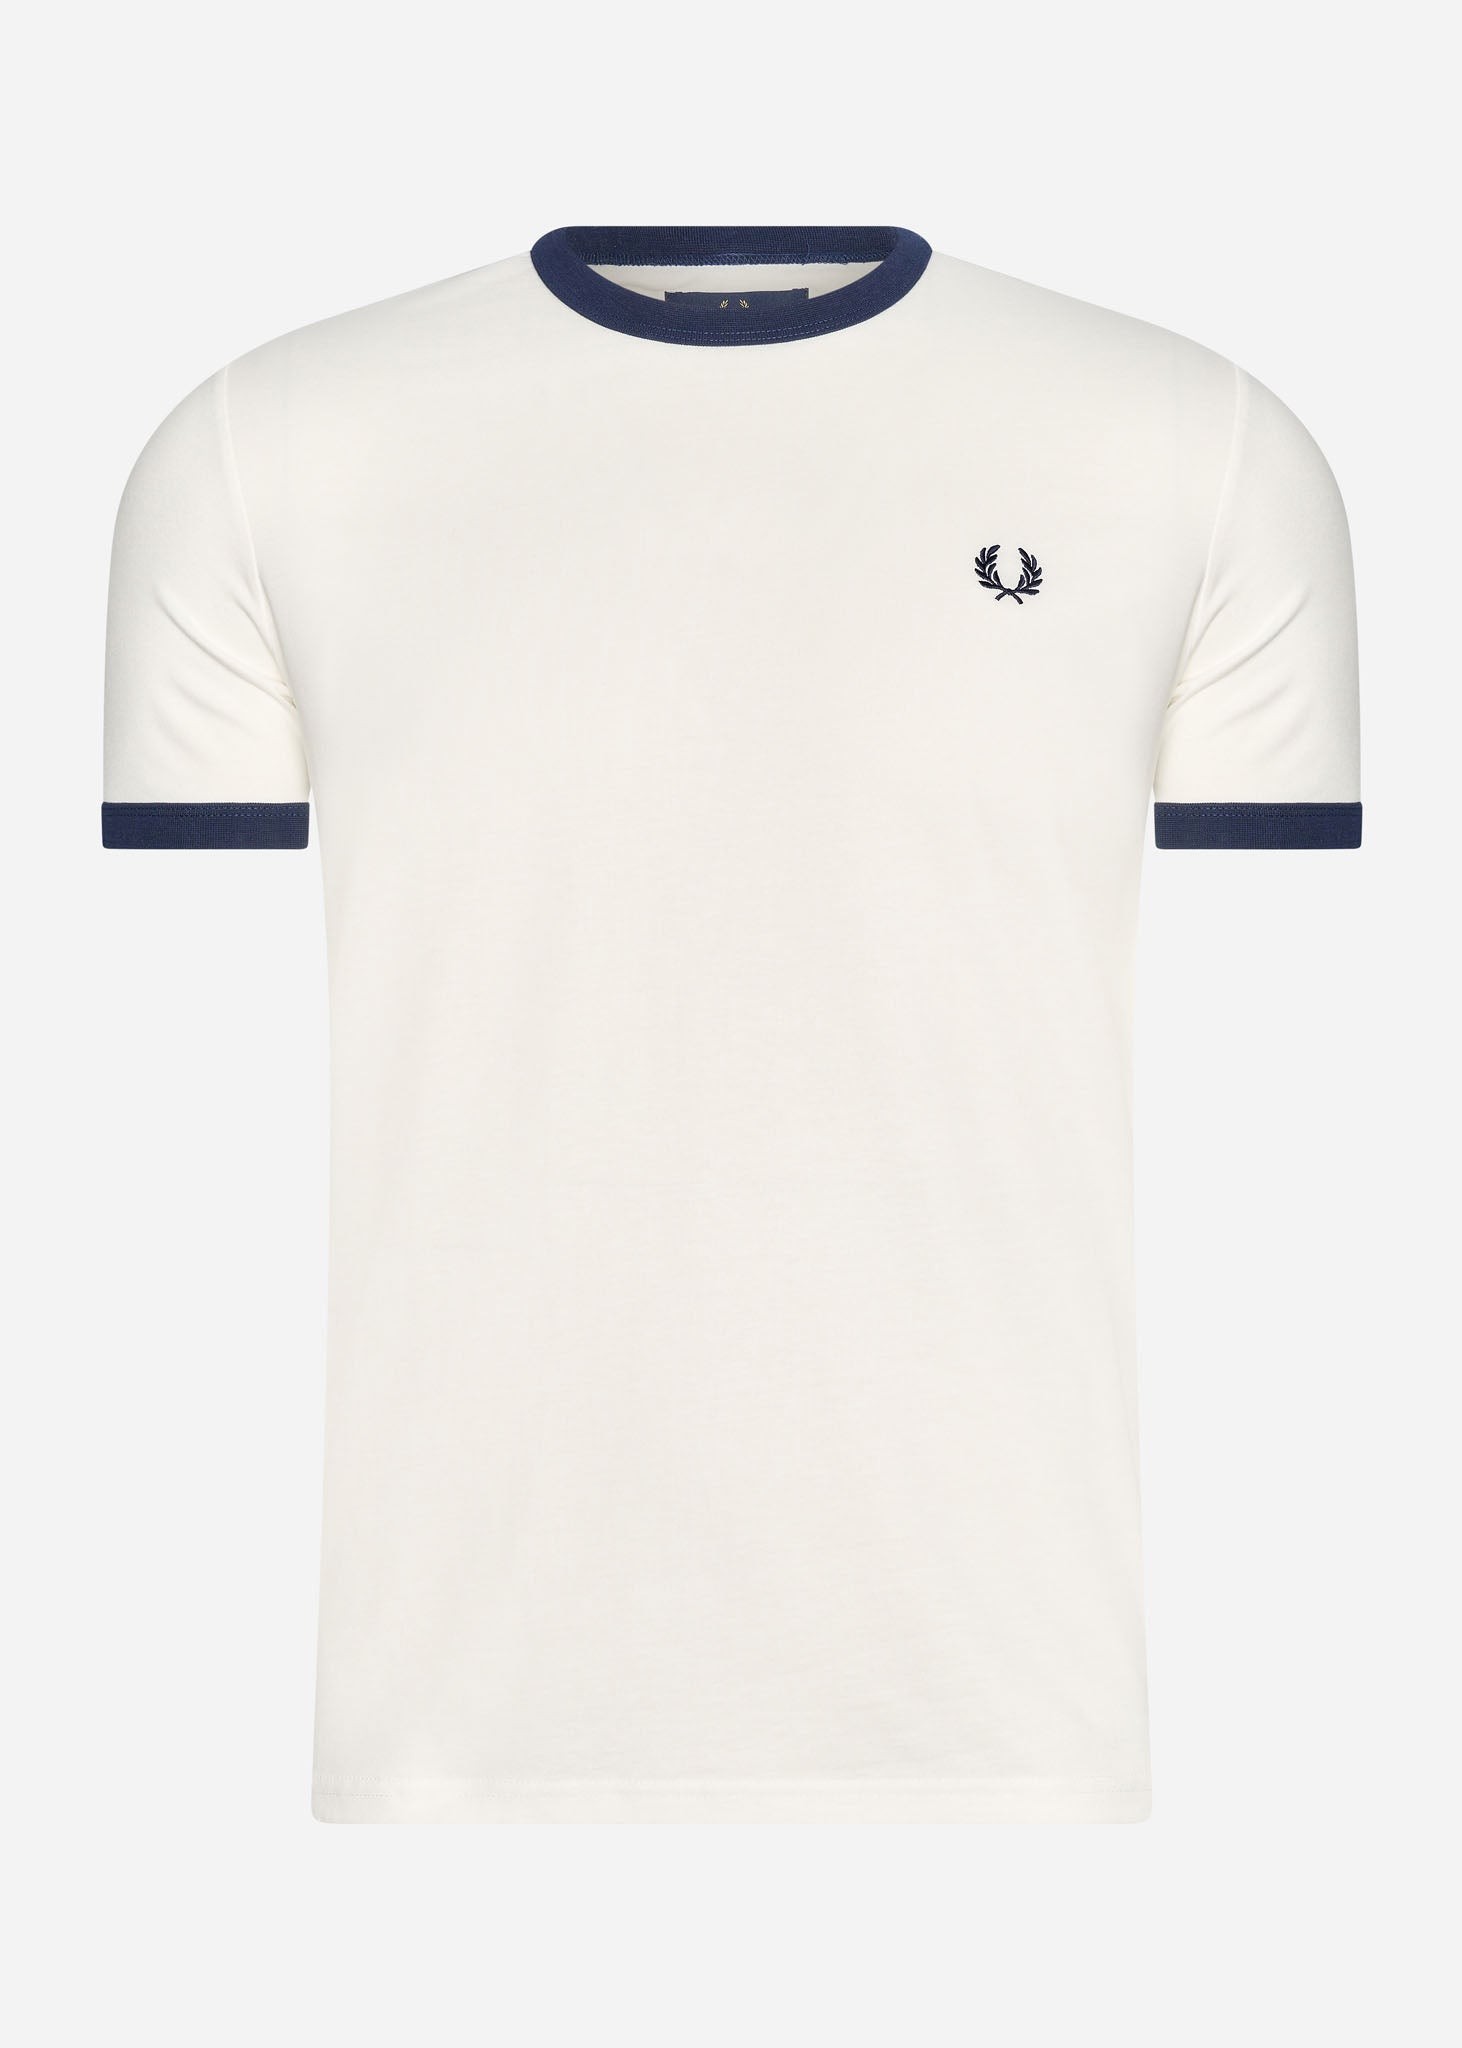 fred perry taped ringer t-shirt snow white